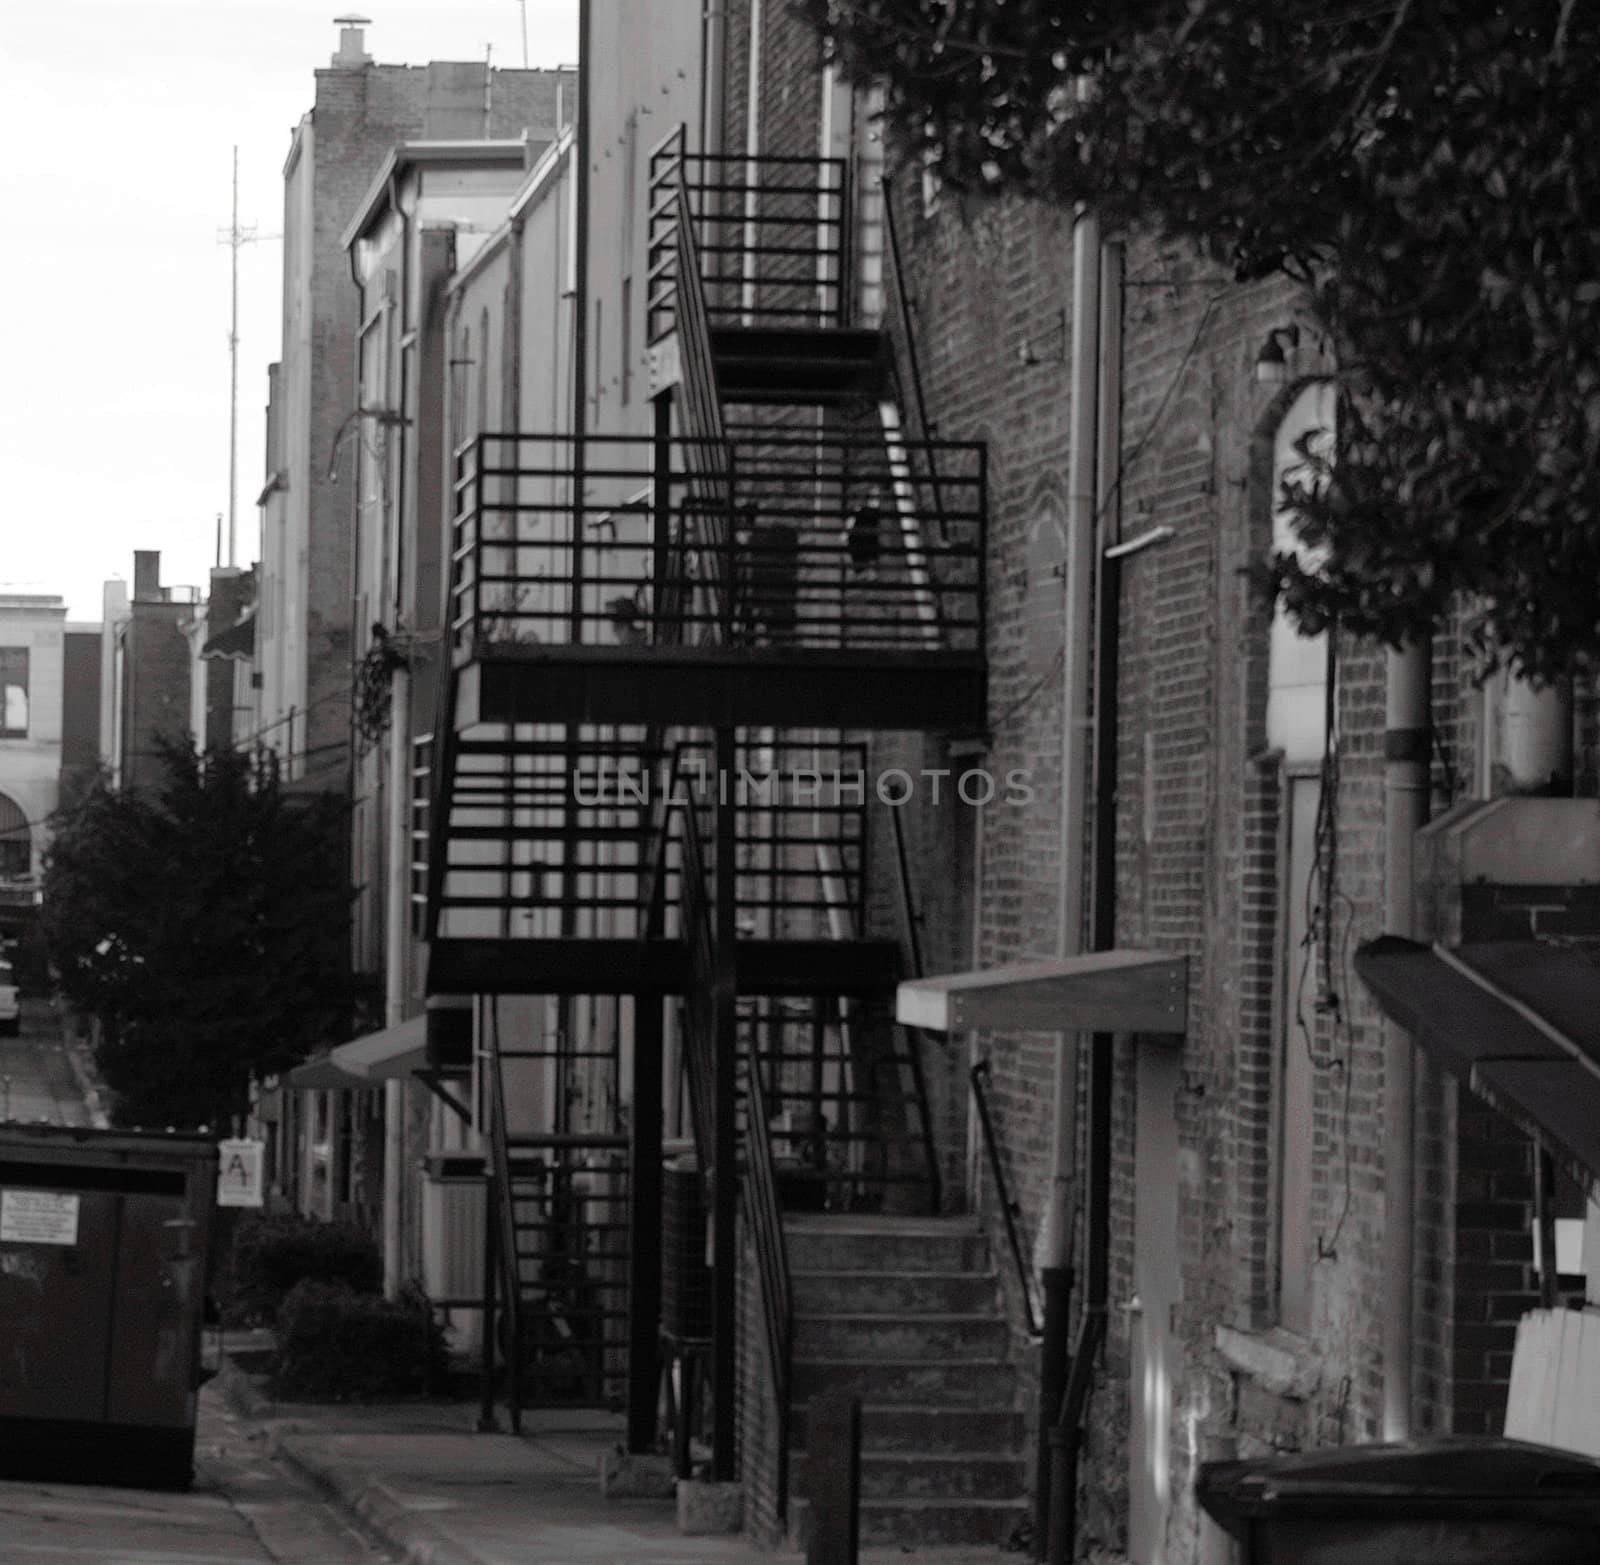 An urban back alley in shown in black and white